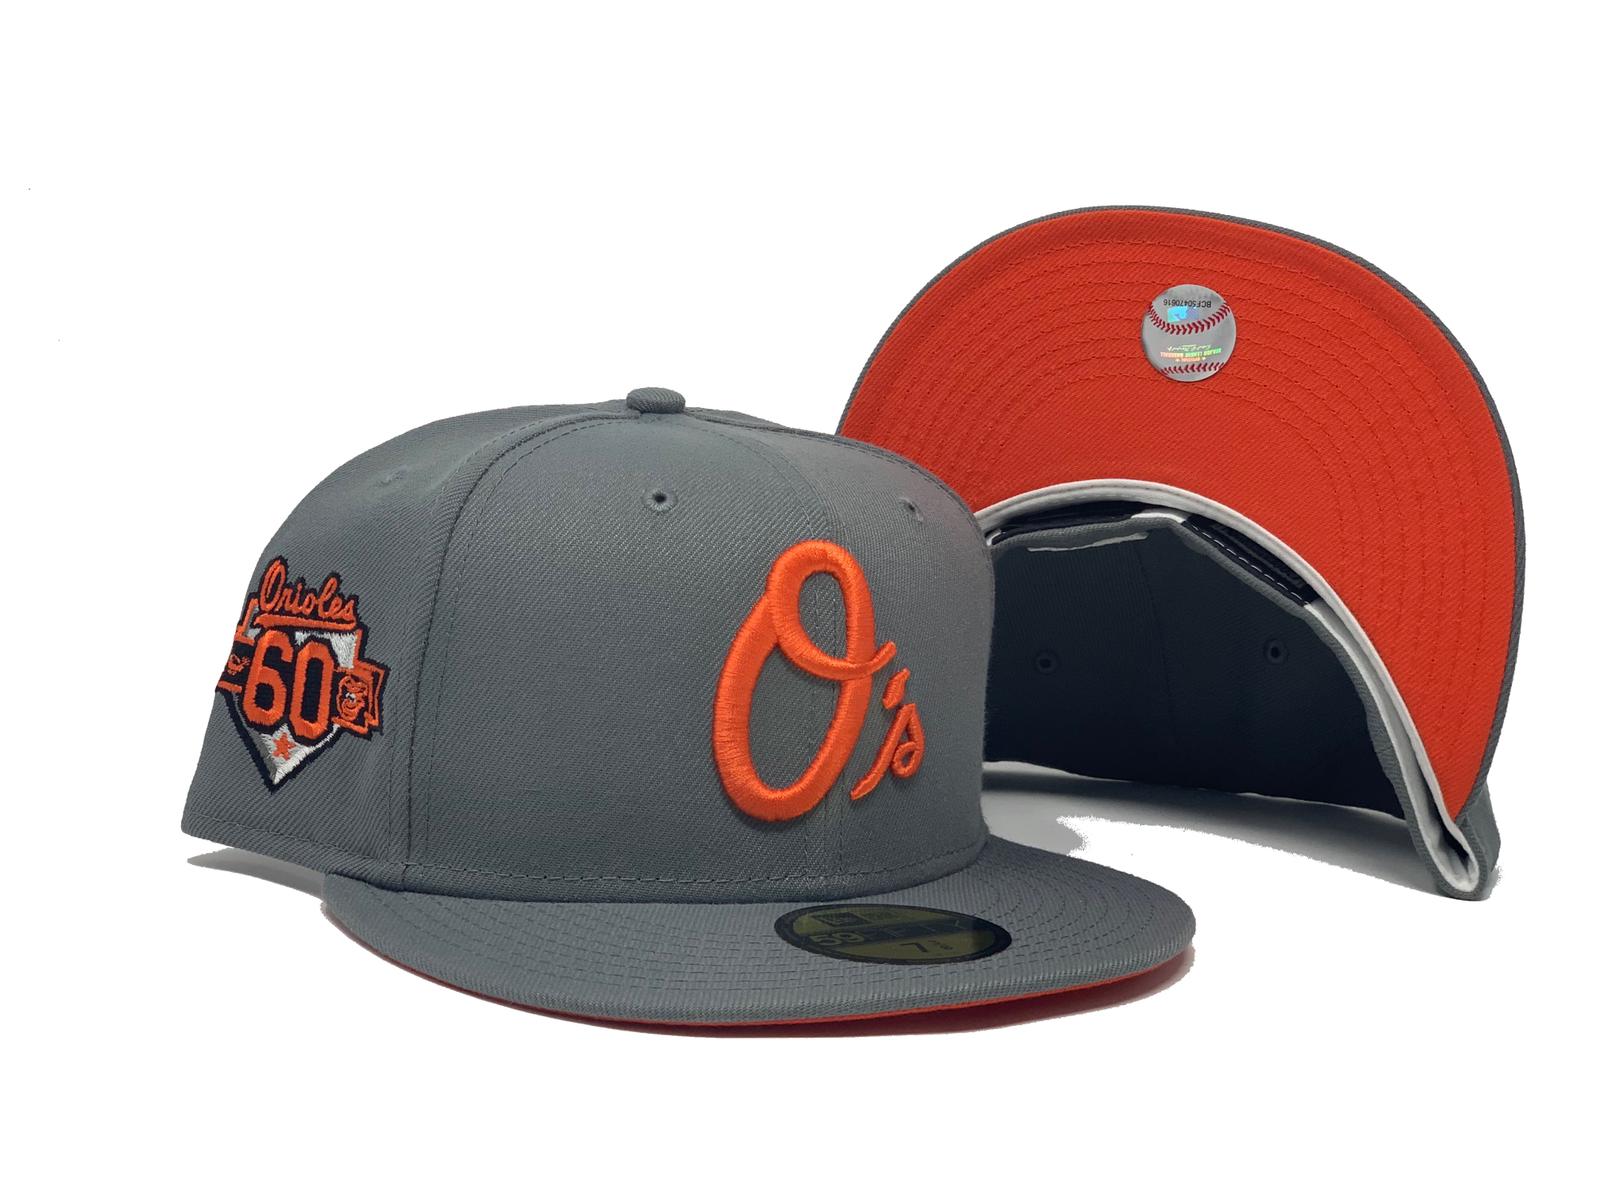 2023 Clubhouse Hat - Orange is stitching, looks cool. : r/orioles